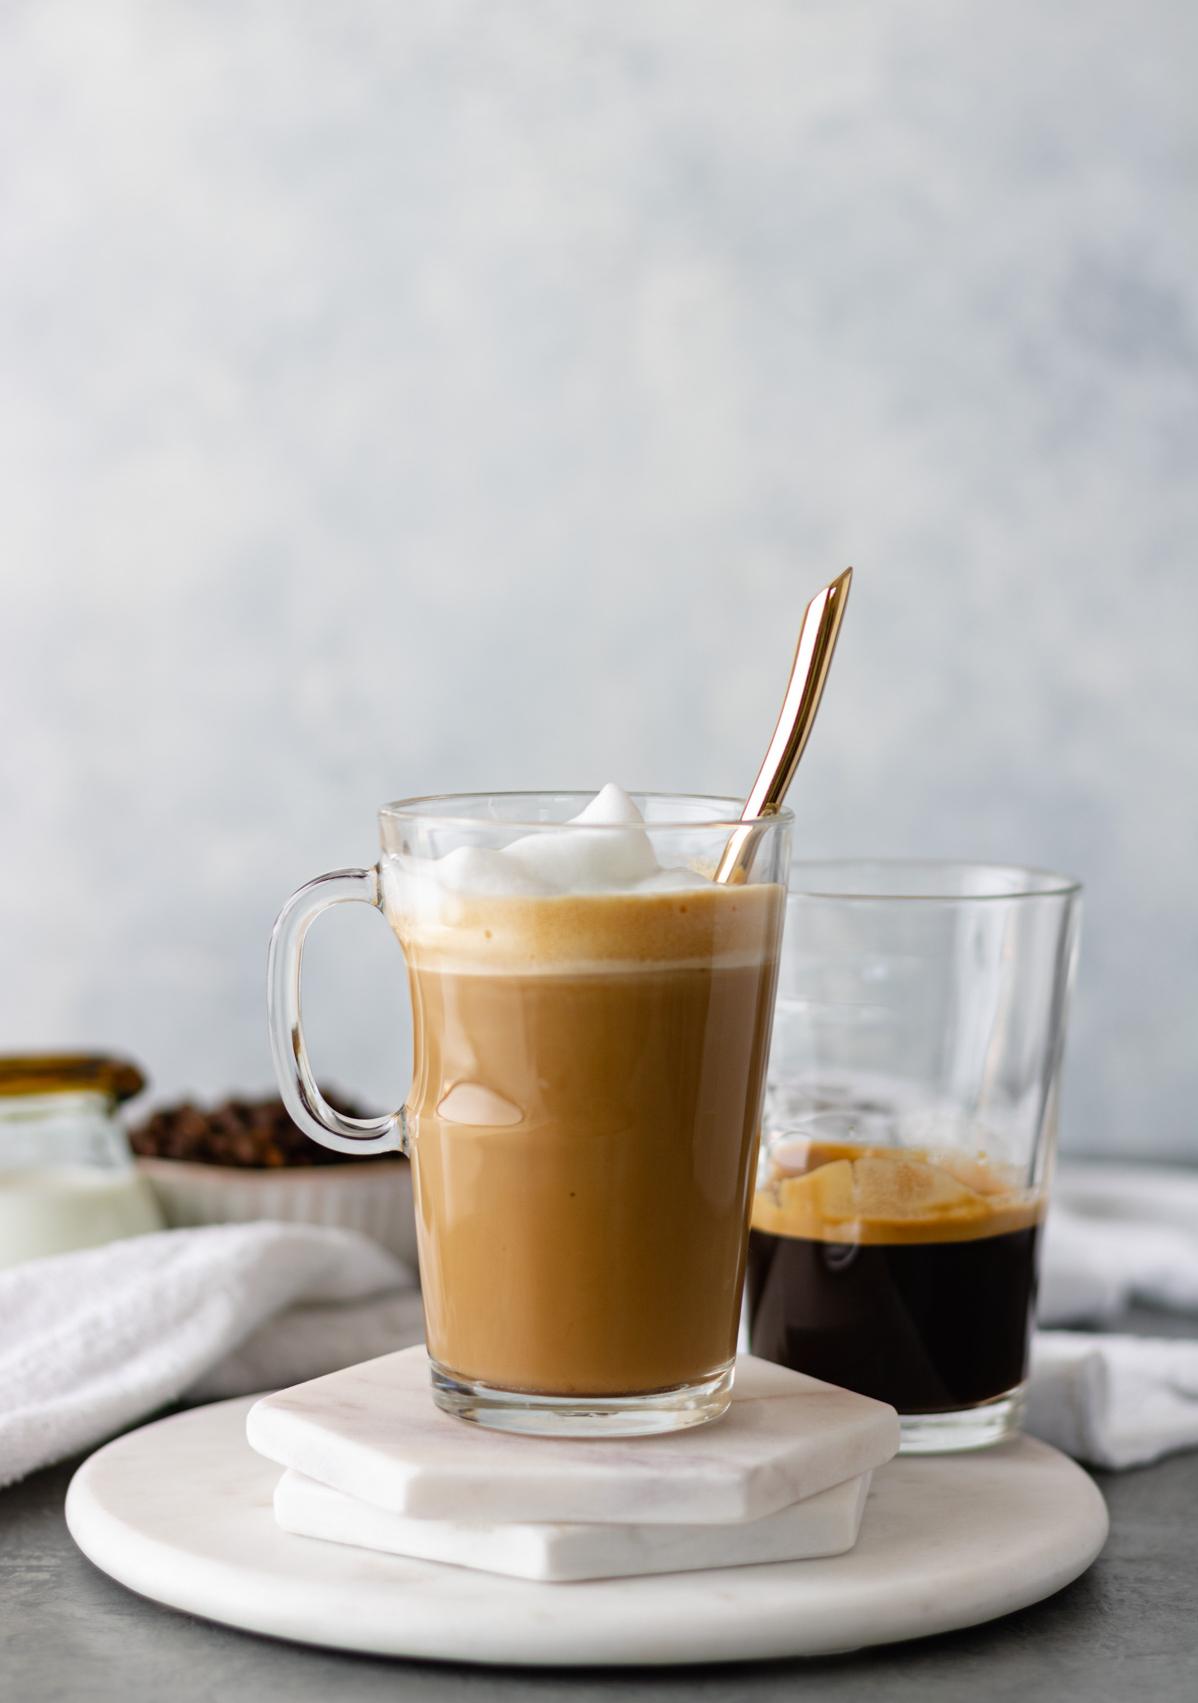 Indulge in the Rich and Creamy Vanilla Bean Latte